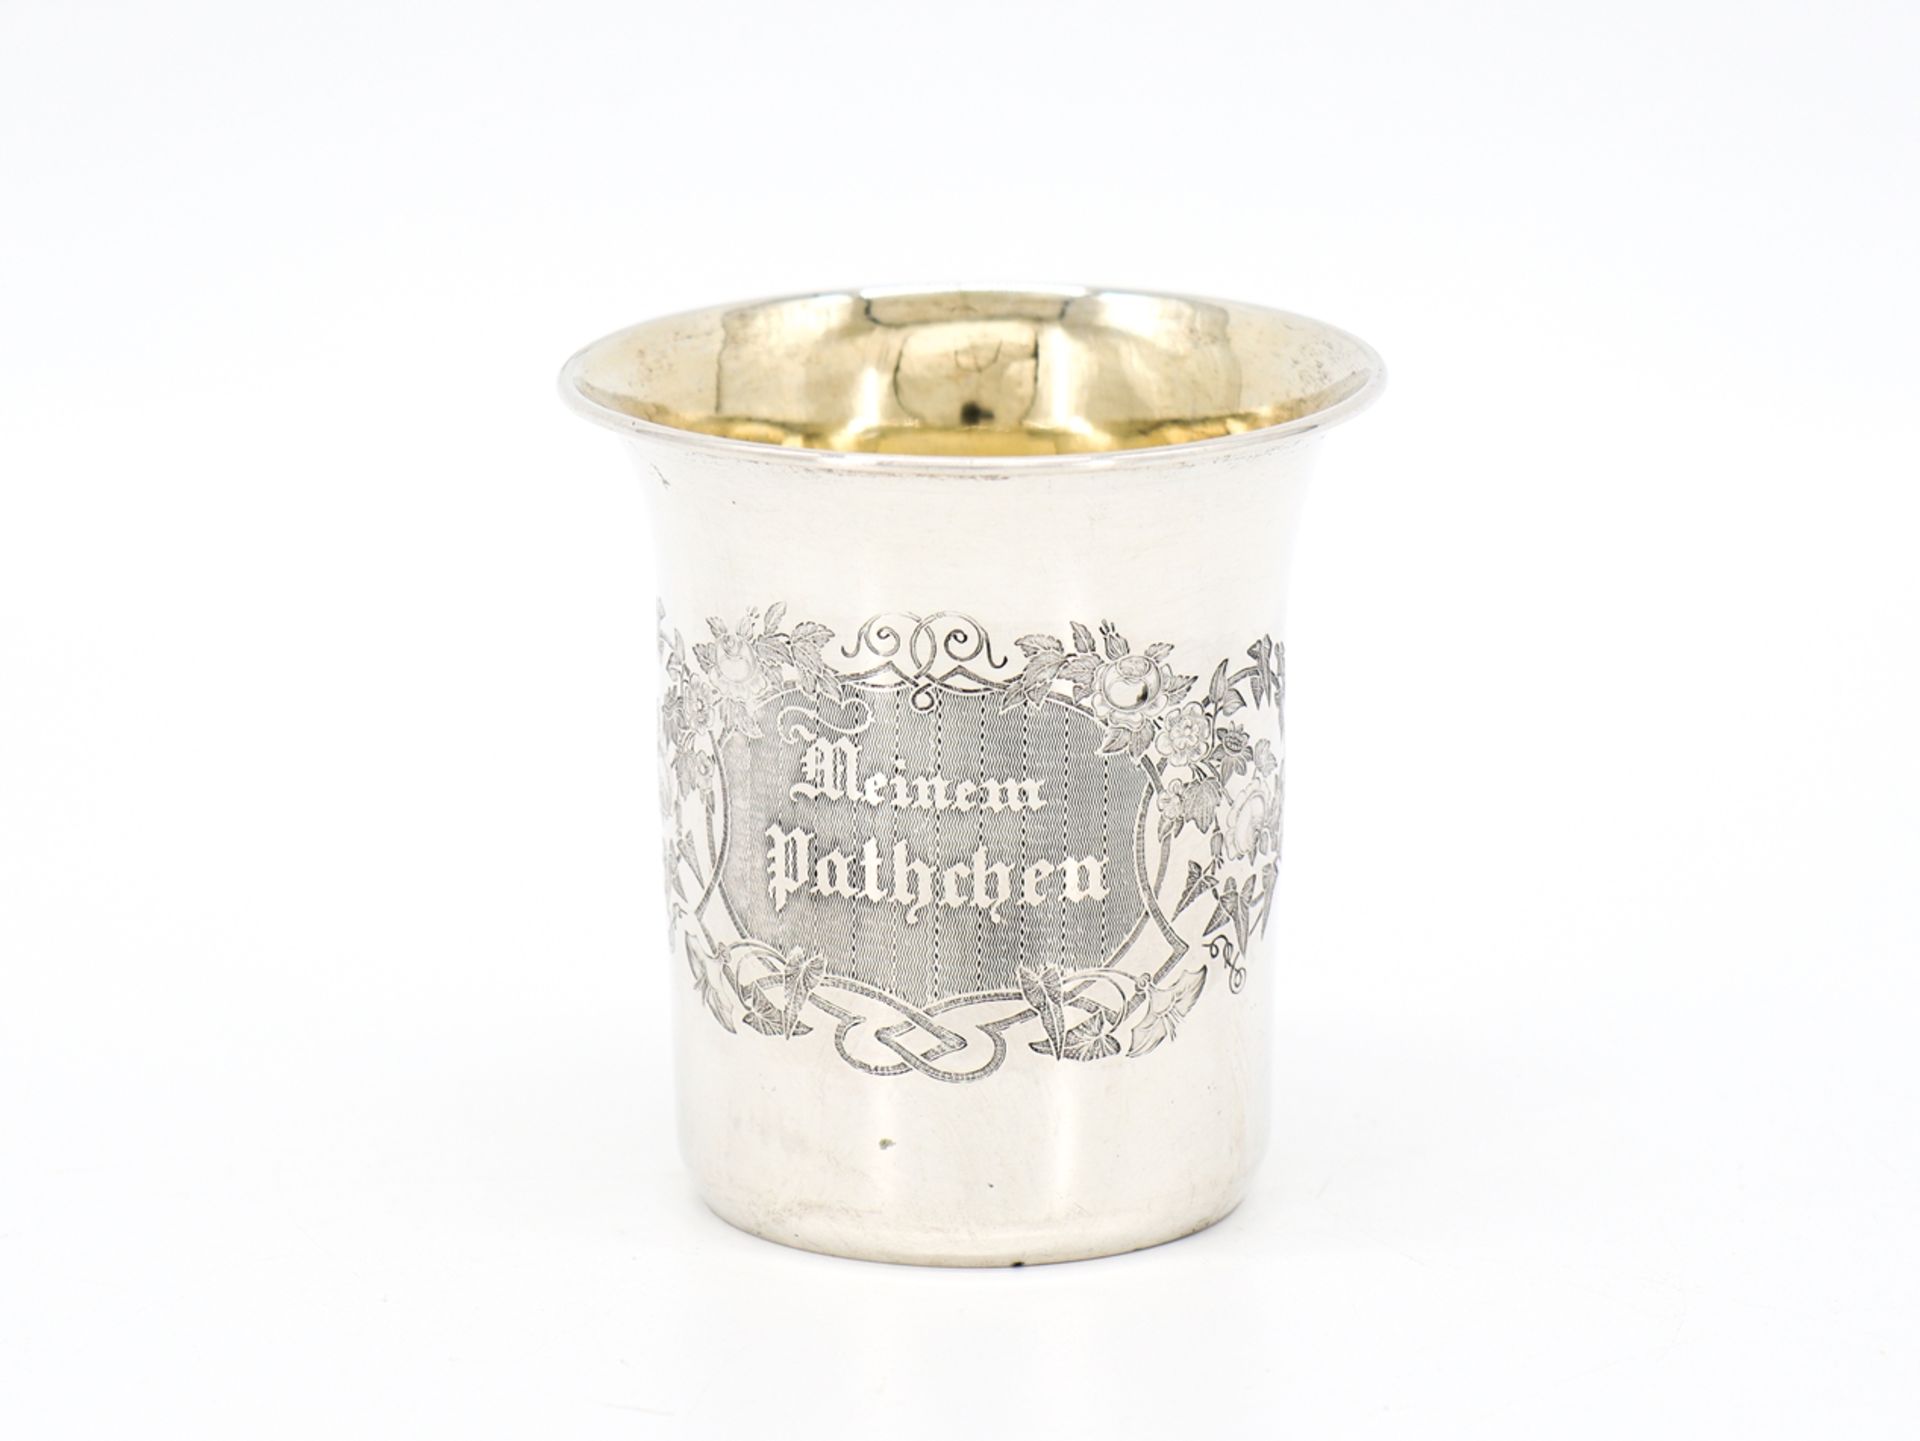 Baptismal cup silver gilded inside, mid 19th century. - Image 6 of 6